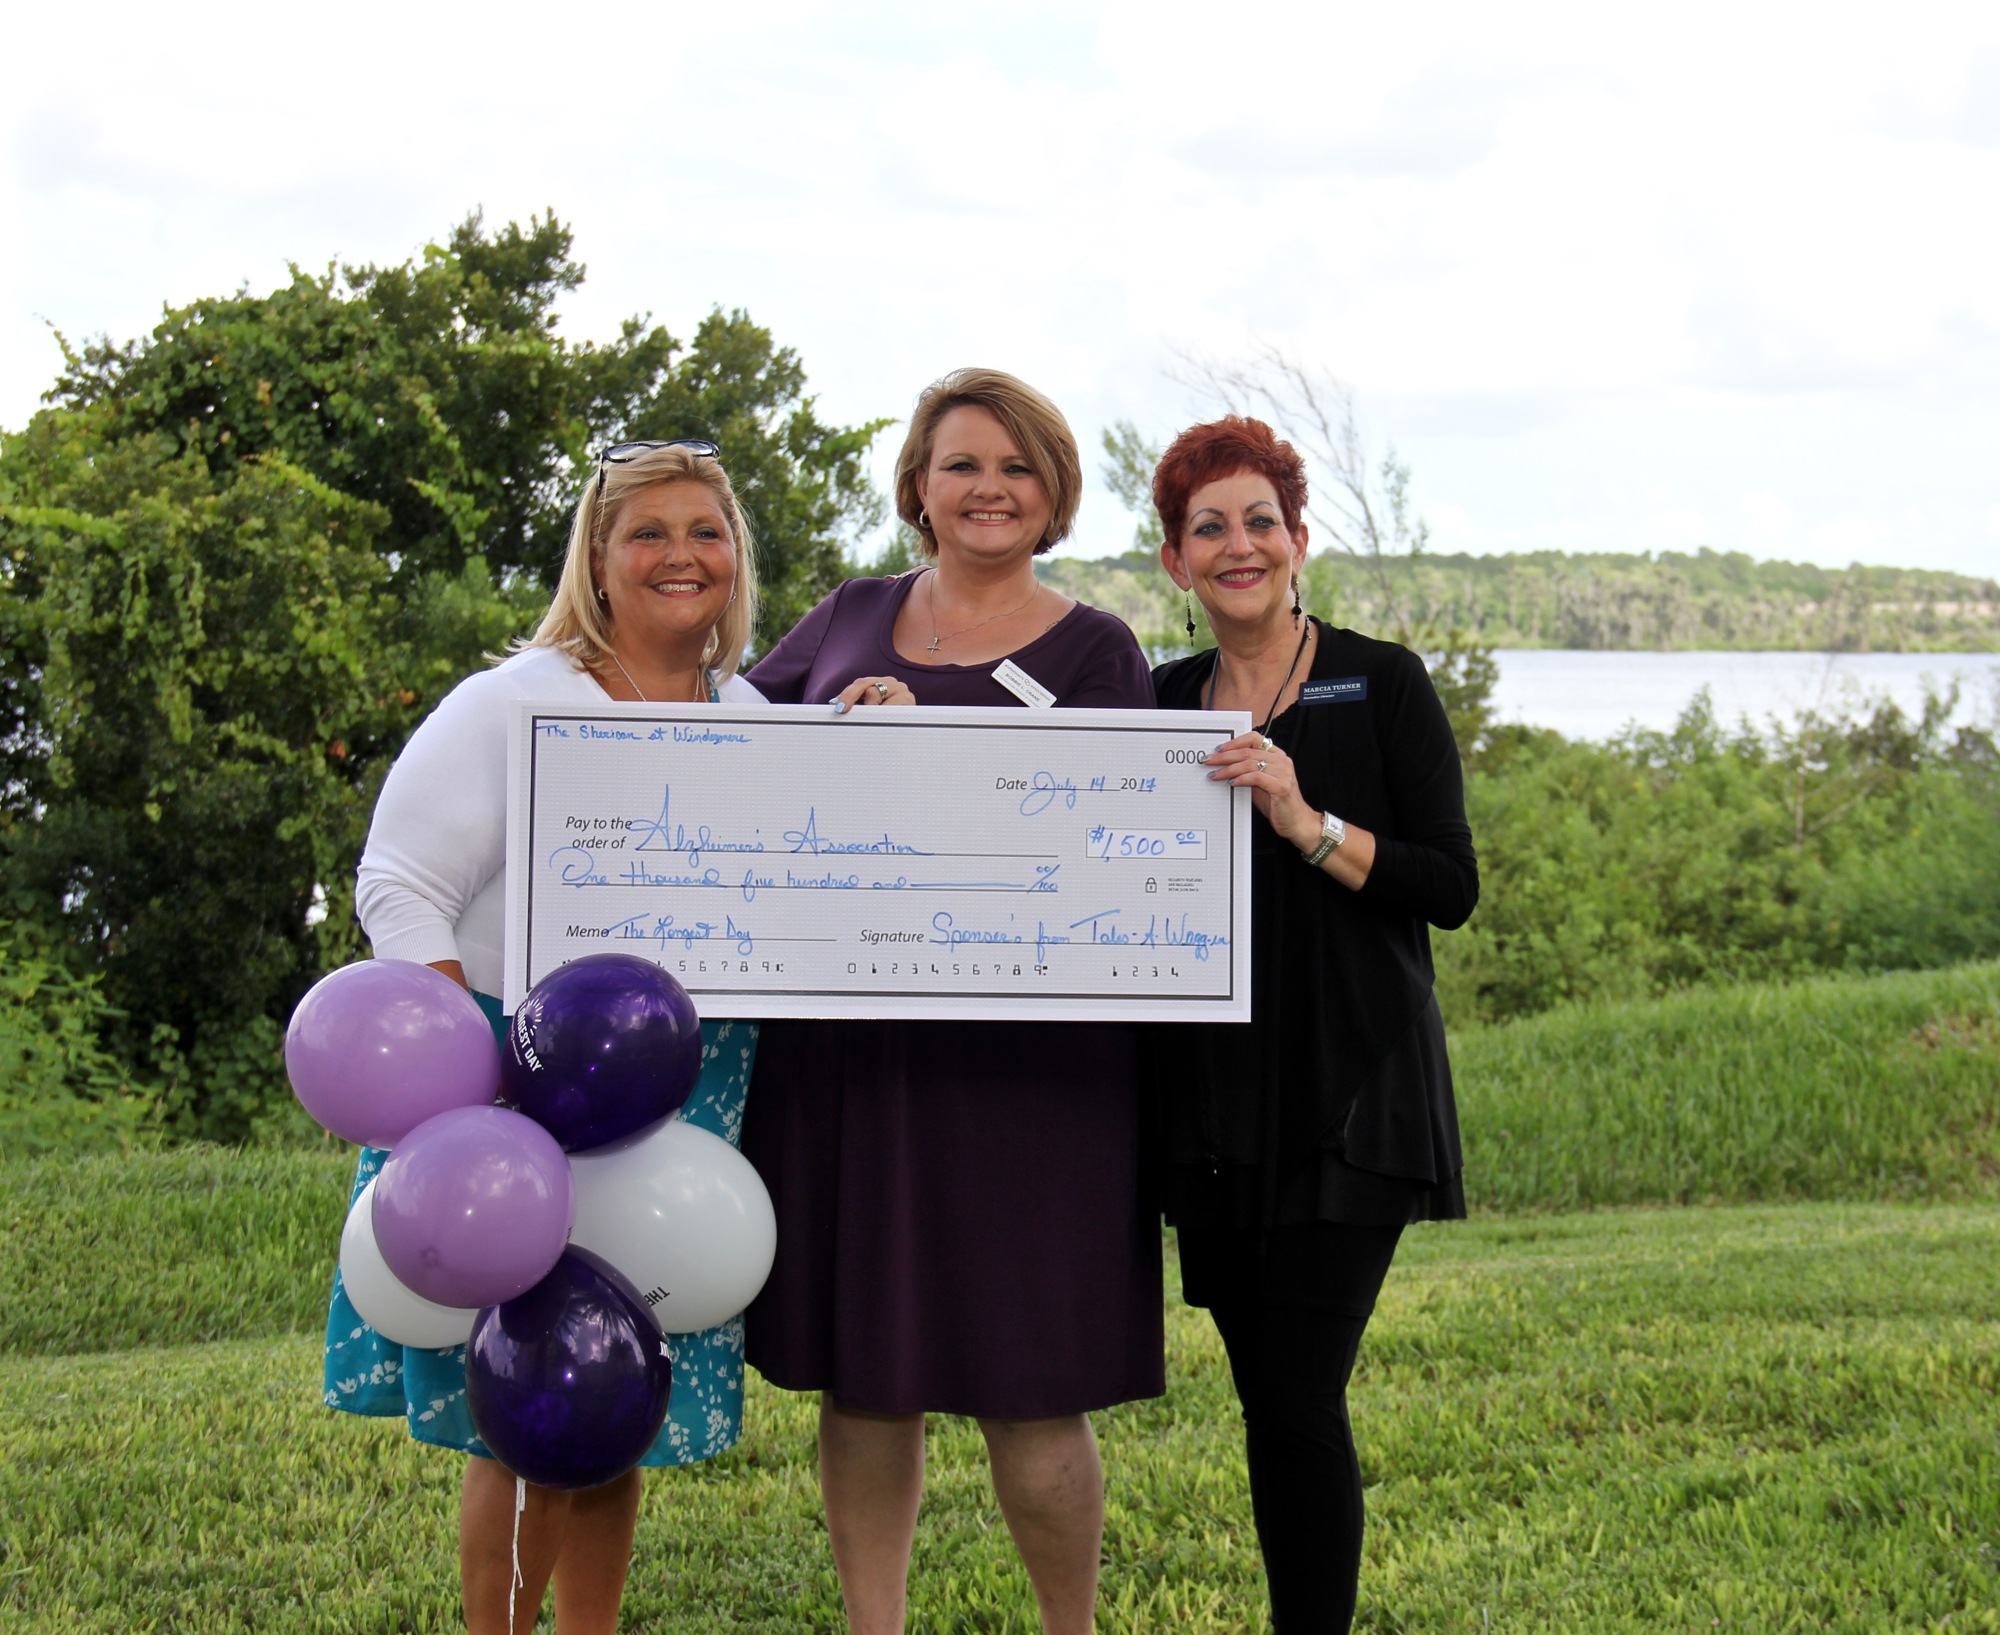 Staff of the Sheridan at Windermere raised $1,500 for the Alzheimer’s Association in recognition of The Longest Day, a day raising awareness for Alzheimer’s caregivers.